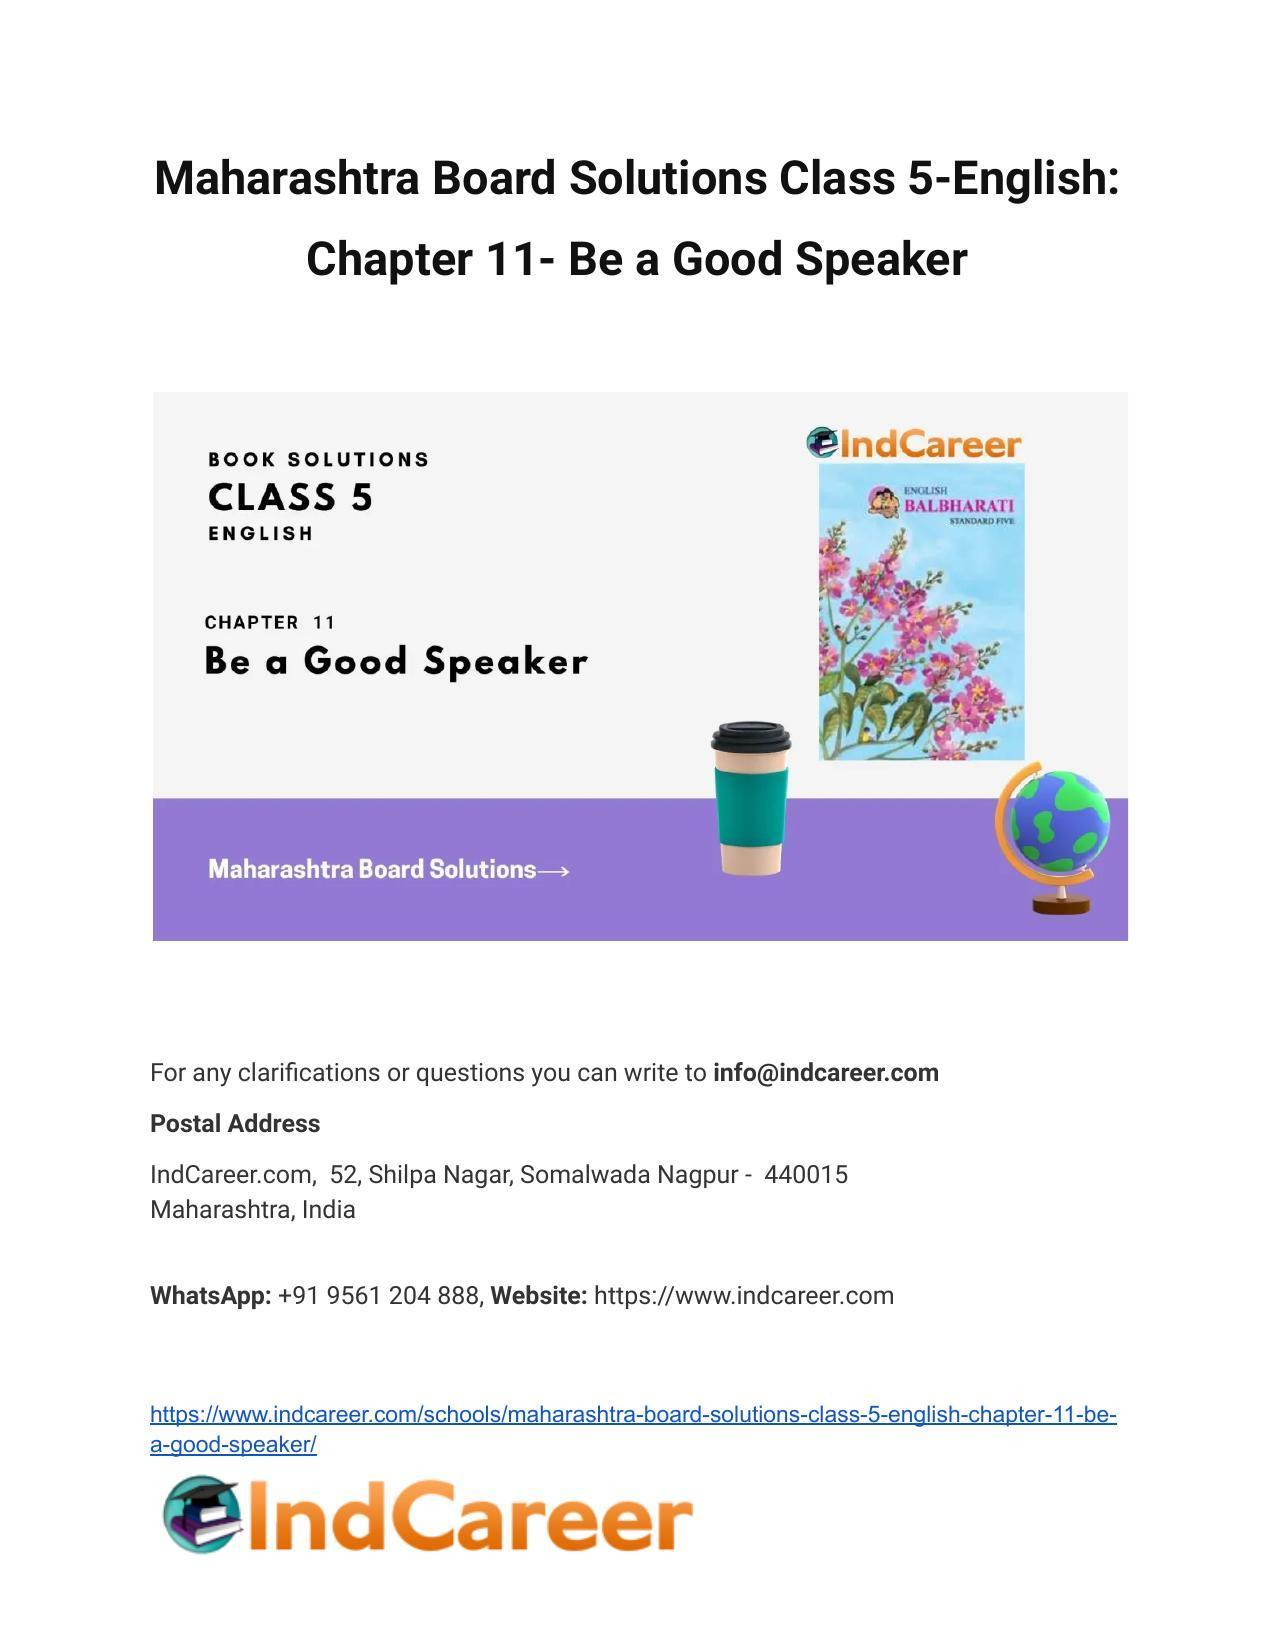 Maharashtra Board Solutions Class 5-English: Chapter 11- Be a Good Speaker - Page 1